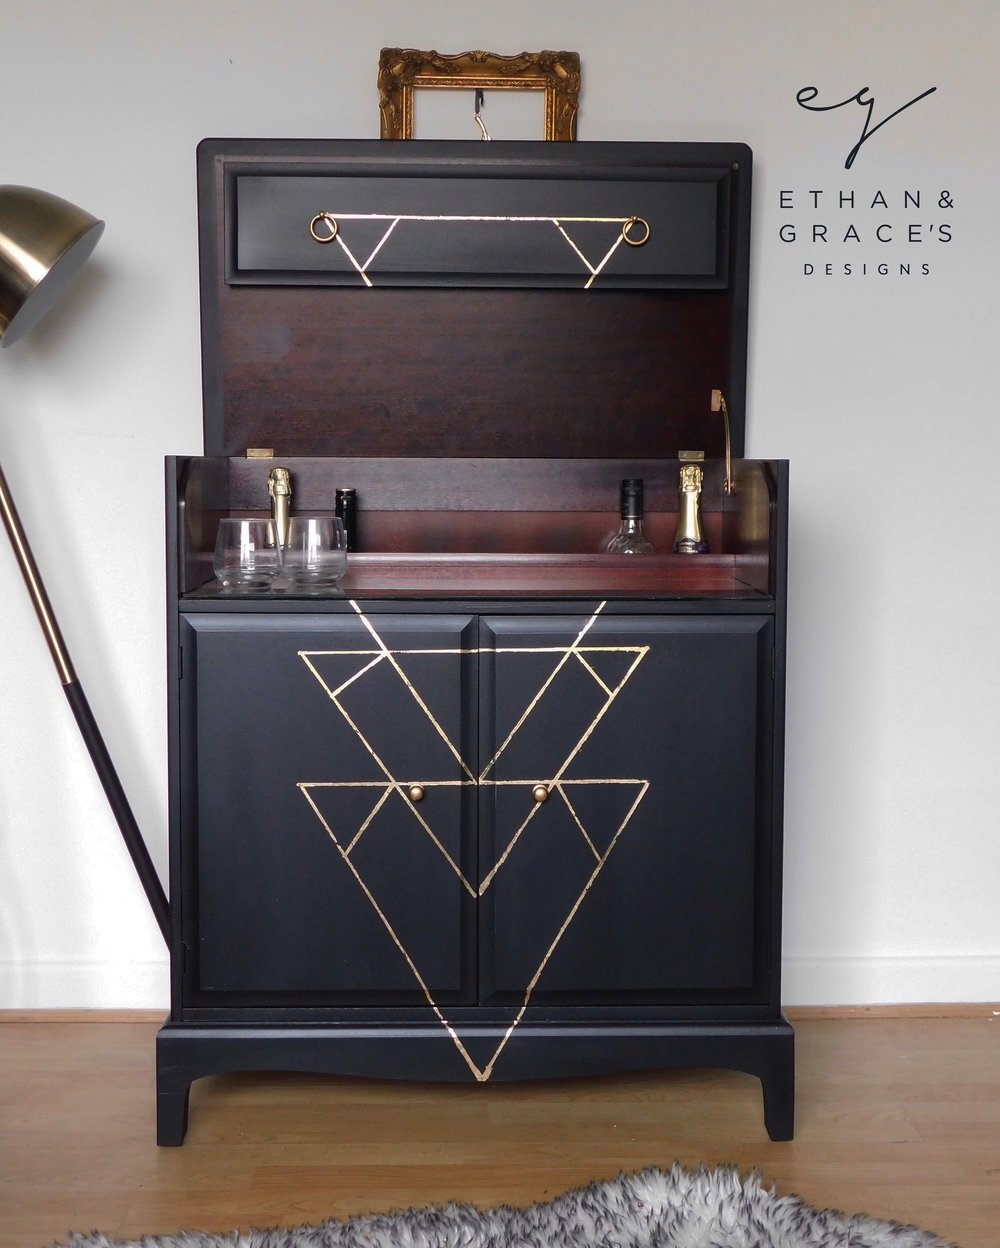 Image of Stunning mahogany stag drinks cabinet in black